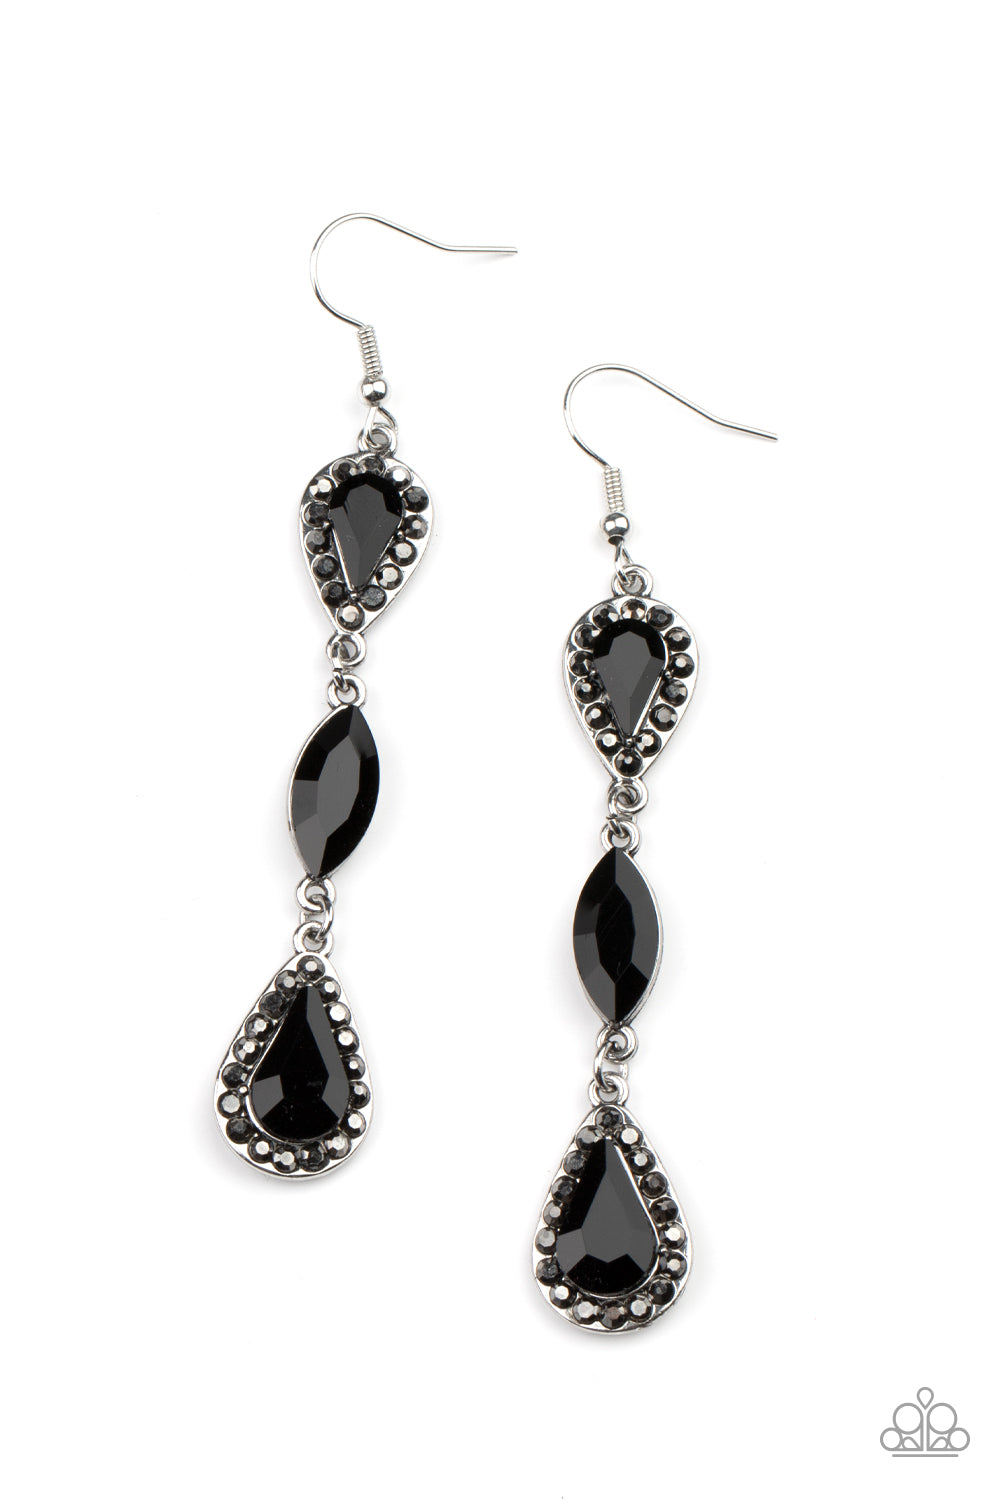 Paparazzi Accessories - Test of TIMELESS E540 - Black Earrings